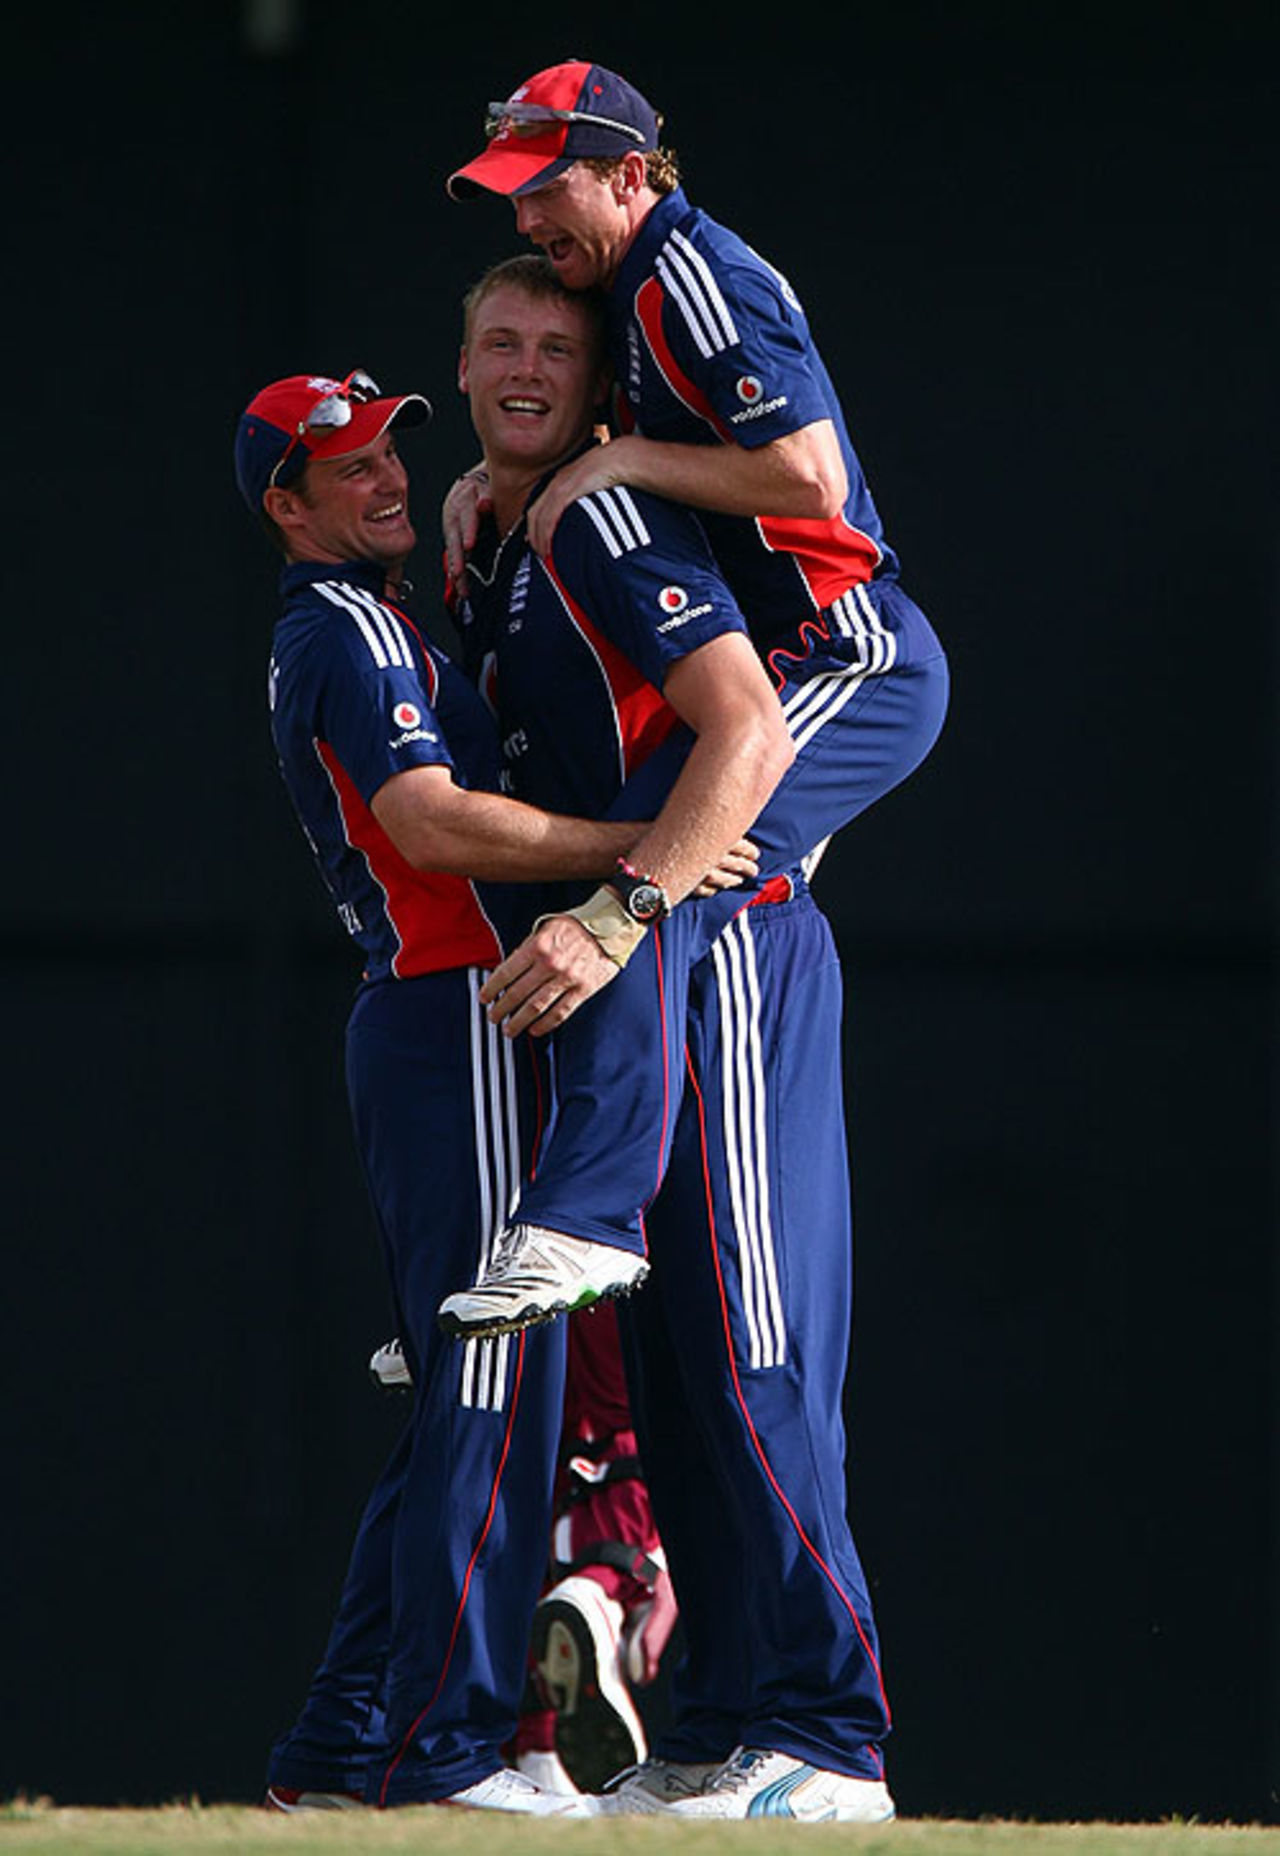 Andrew Flintoff claimed the first hat-trick of his international career to seal England's ODI series win in the Caribbean, West Indies v England, 5th ODI, St Lucia, April 3, 2009